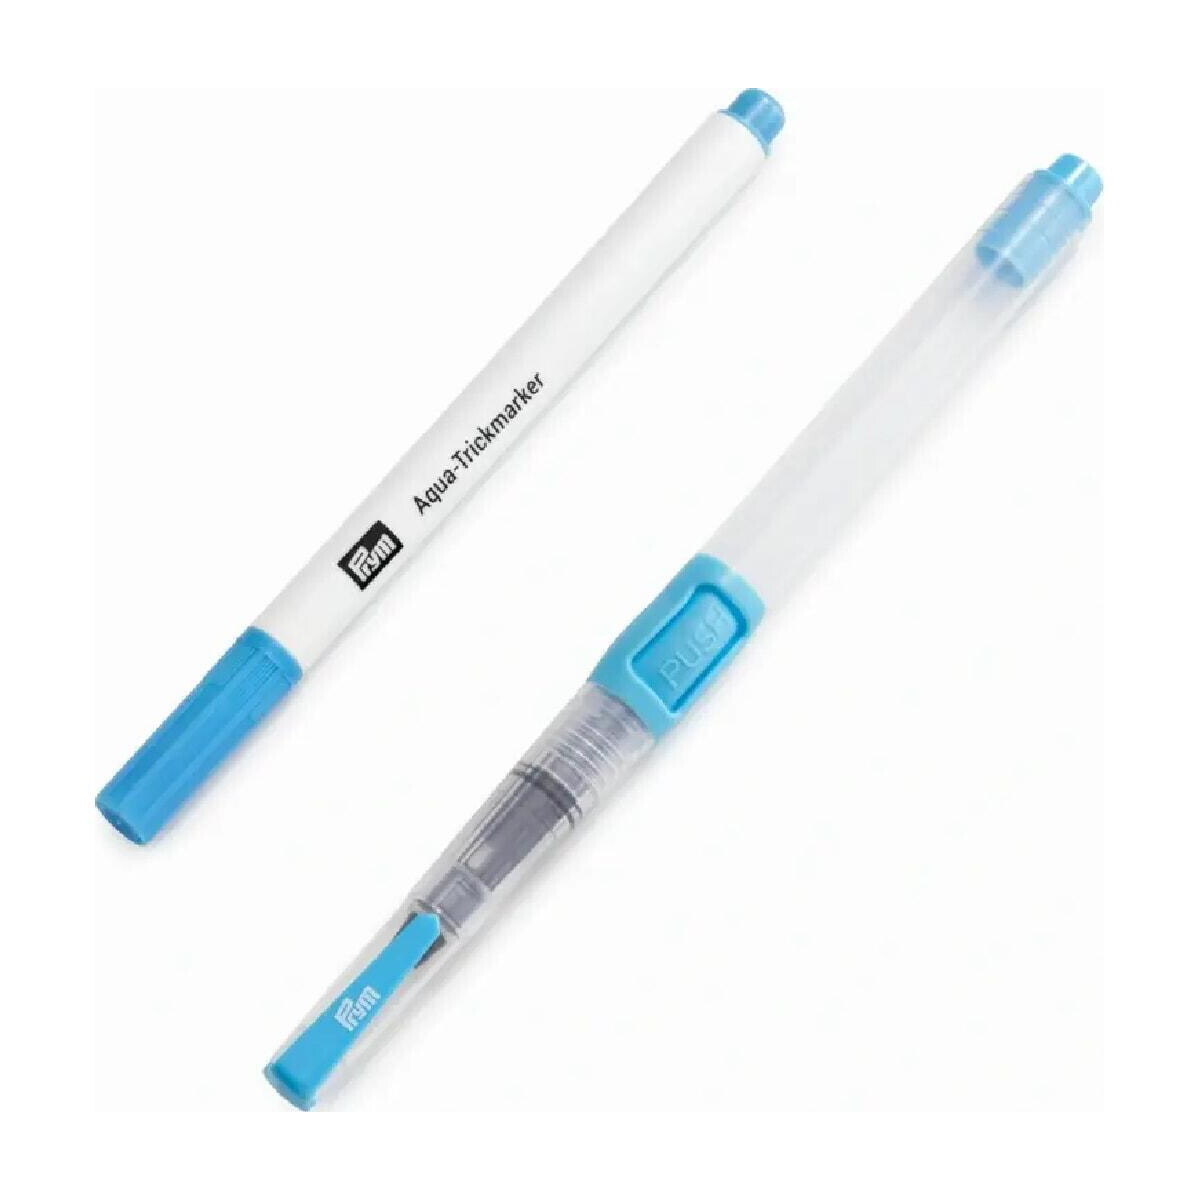 Prym Set Trick Marker Aqua water-soluble and water pencil